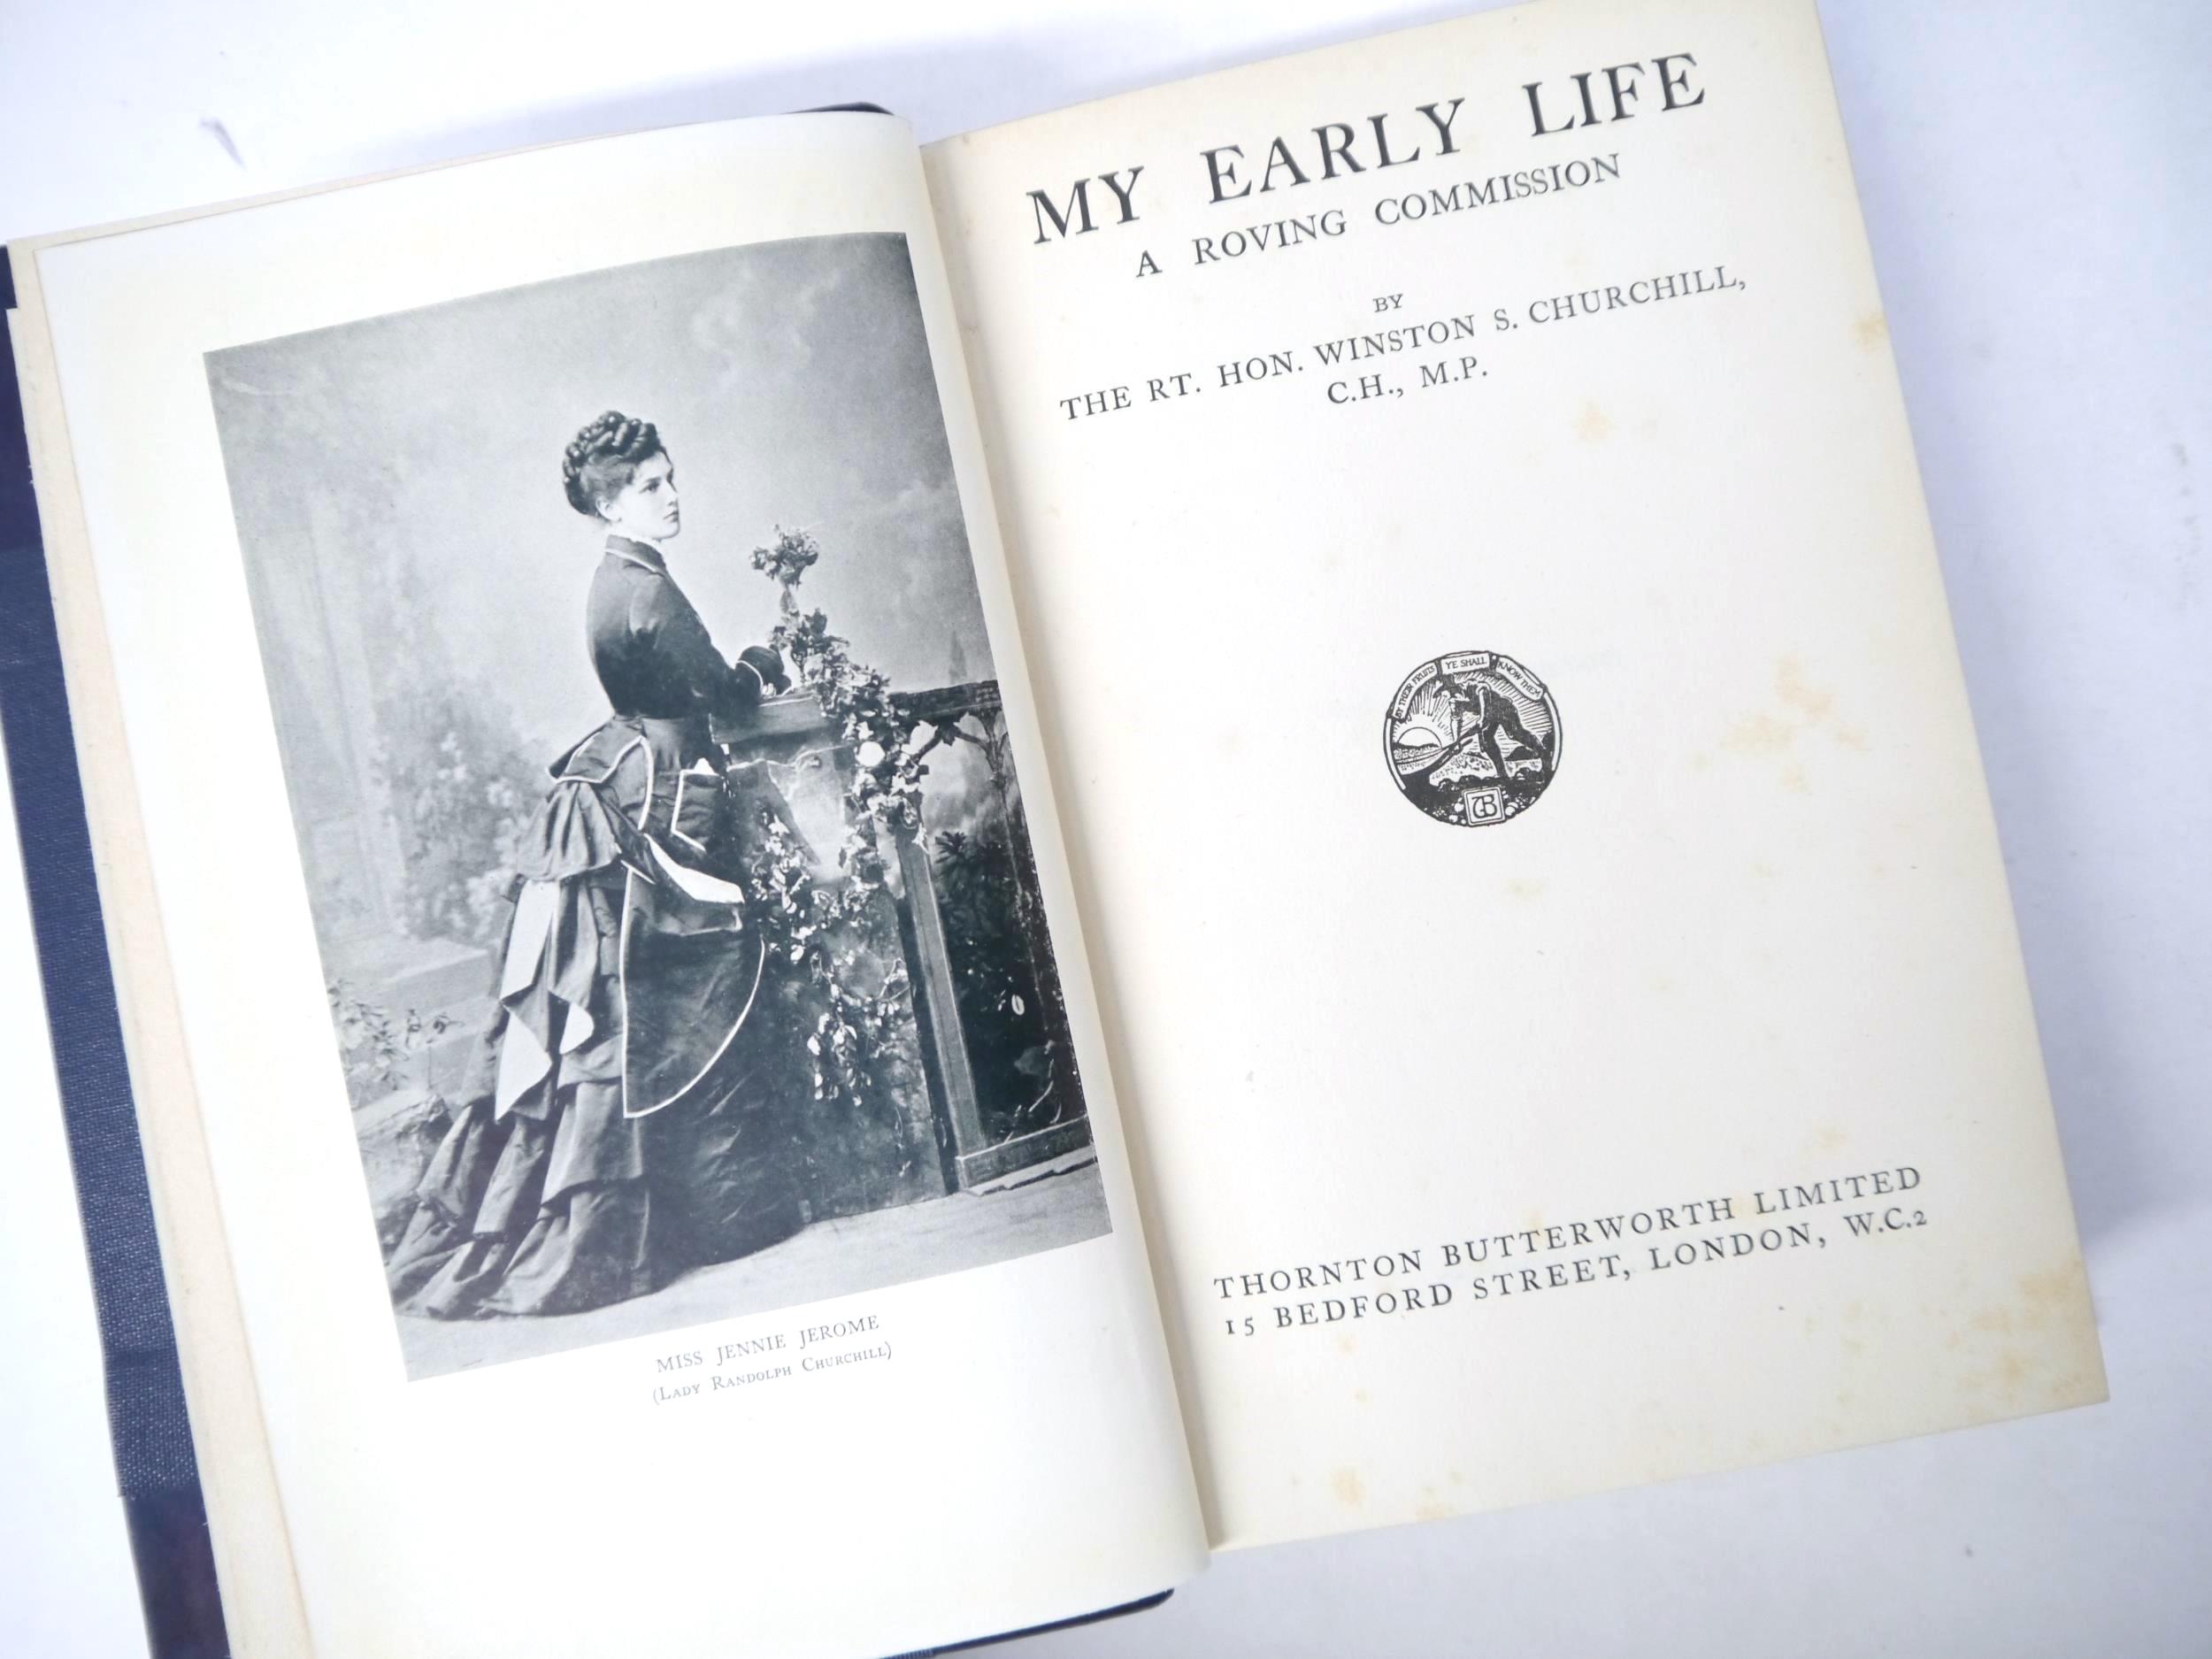 Winston S. Churchill: 'My Early Life. A Roving Commission.', London, Thornton Butterworth, 1930, 1st - Image 3 of 23